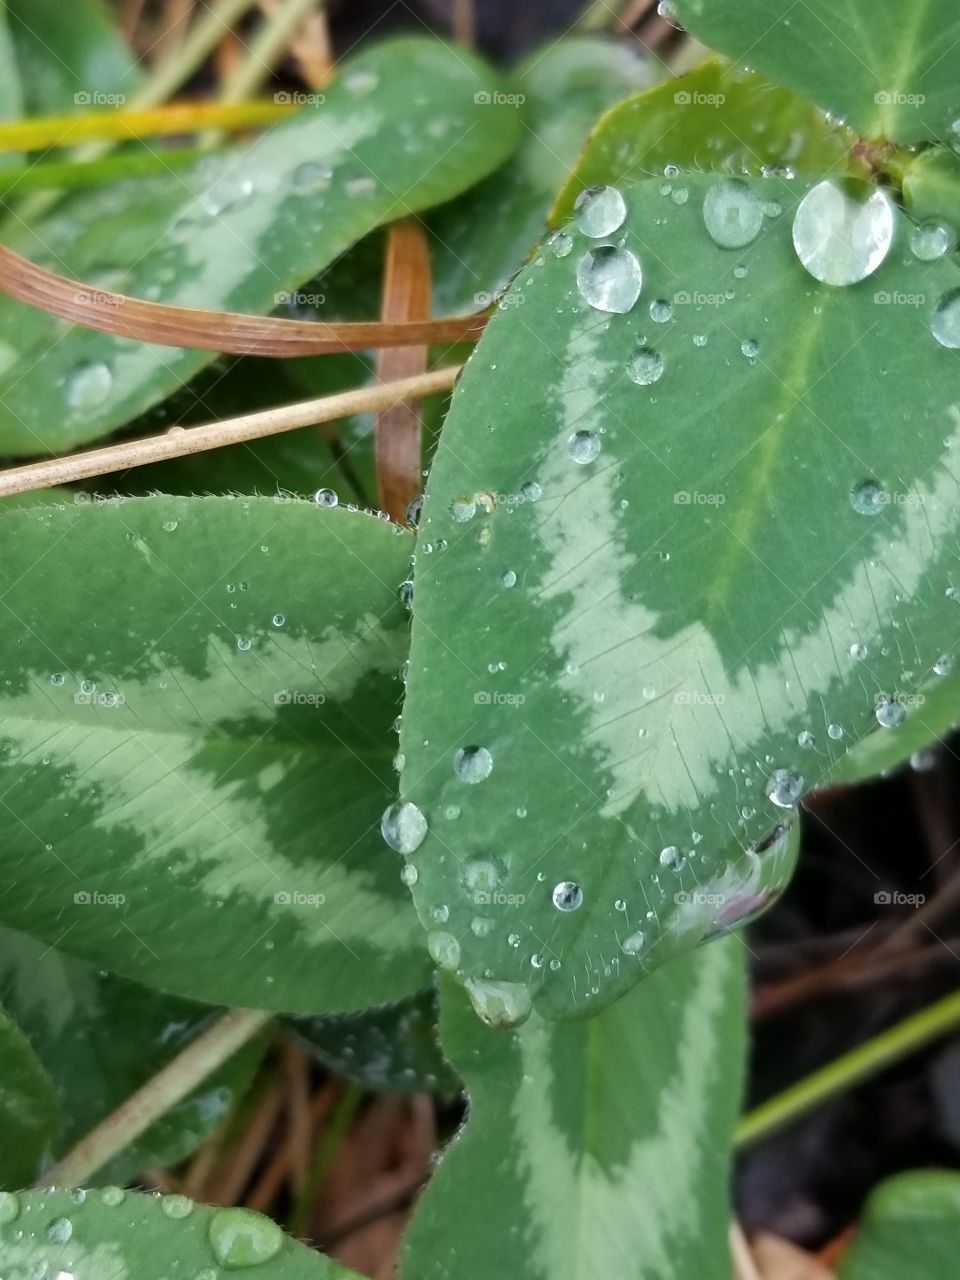 clover leaf with water drops